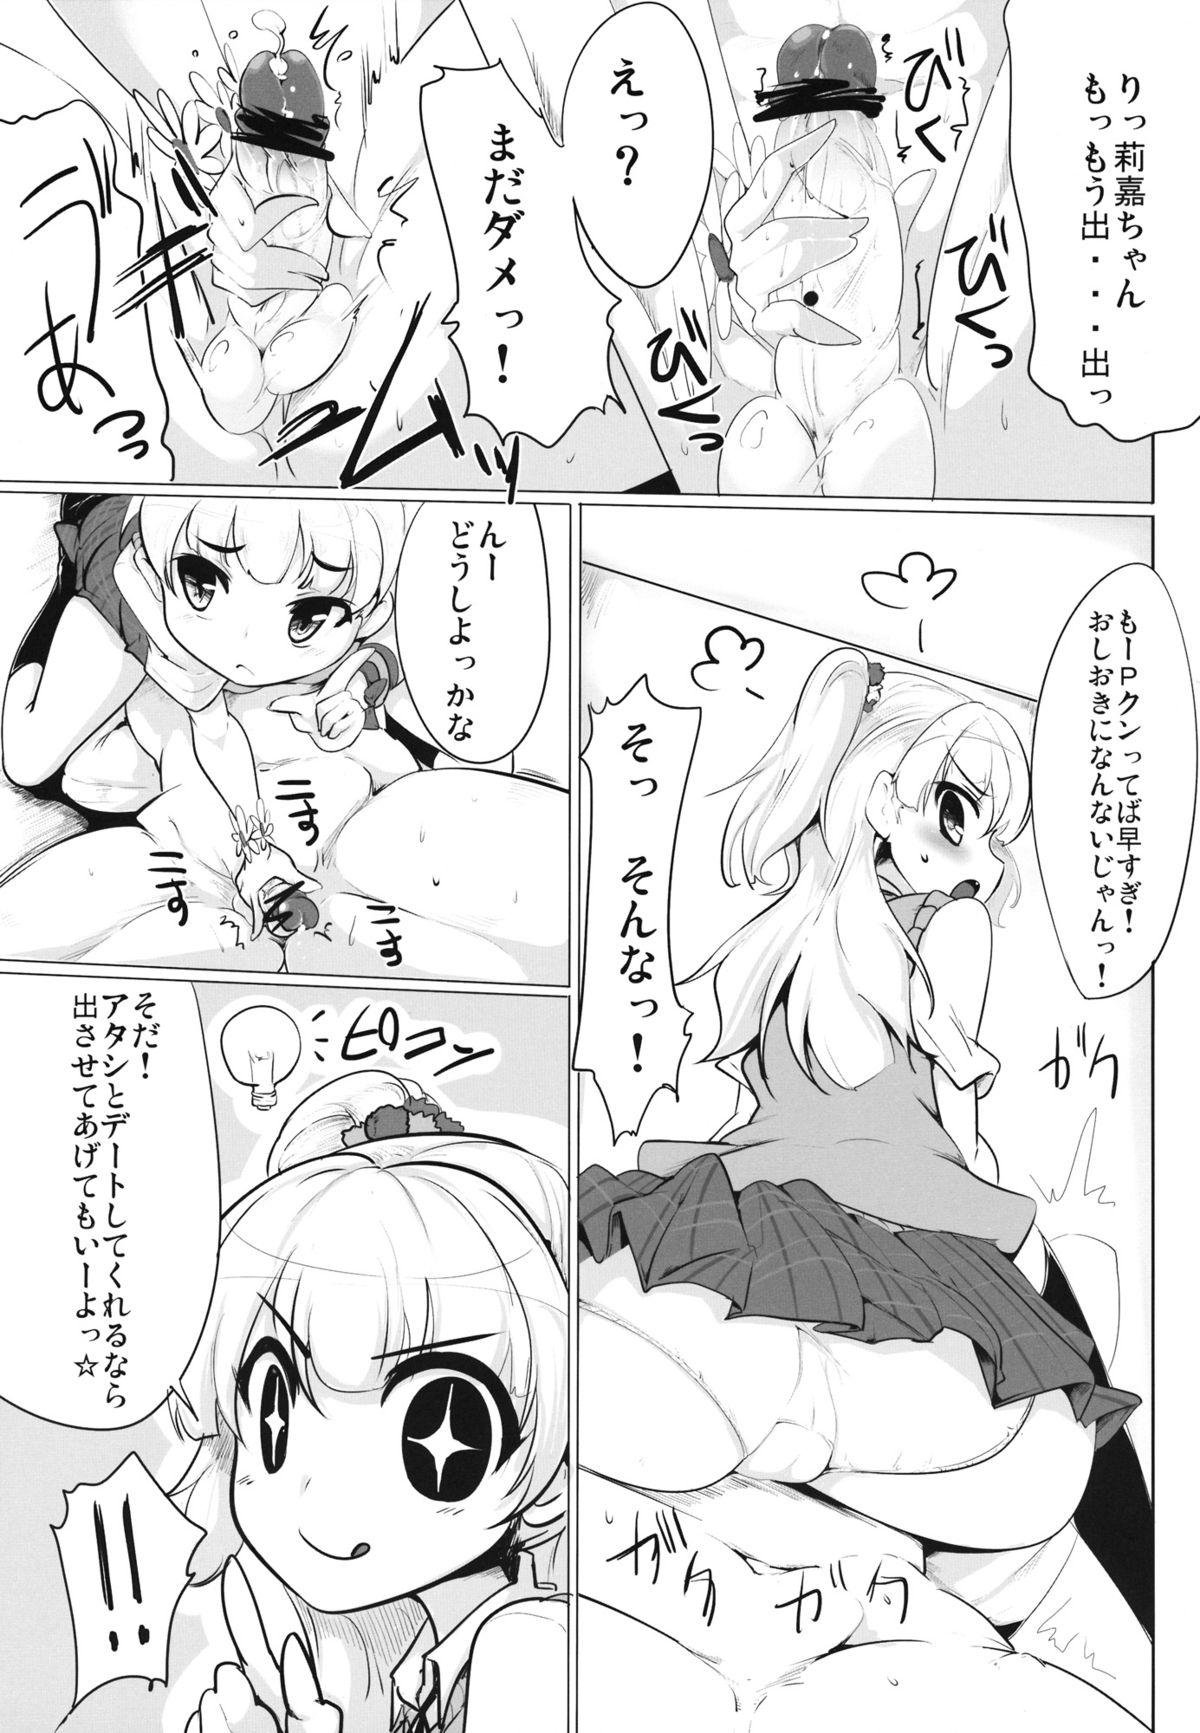 Sexteen Imouto no Hon - The idolmaster Gaysex - Page 8